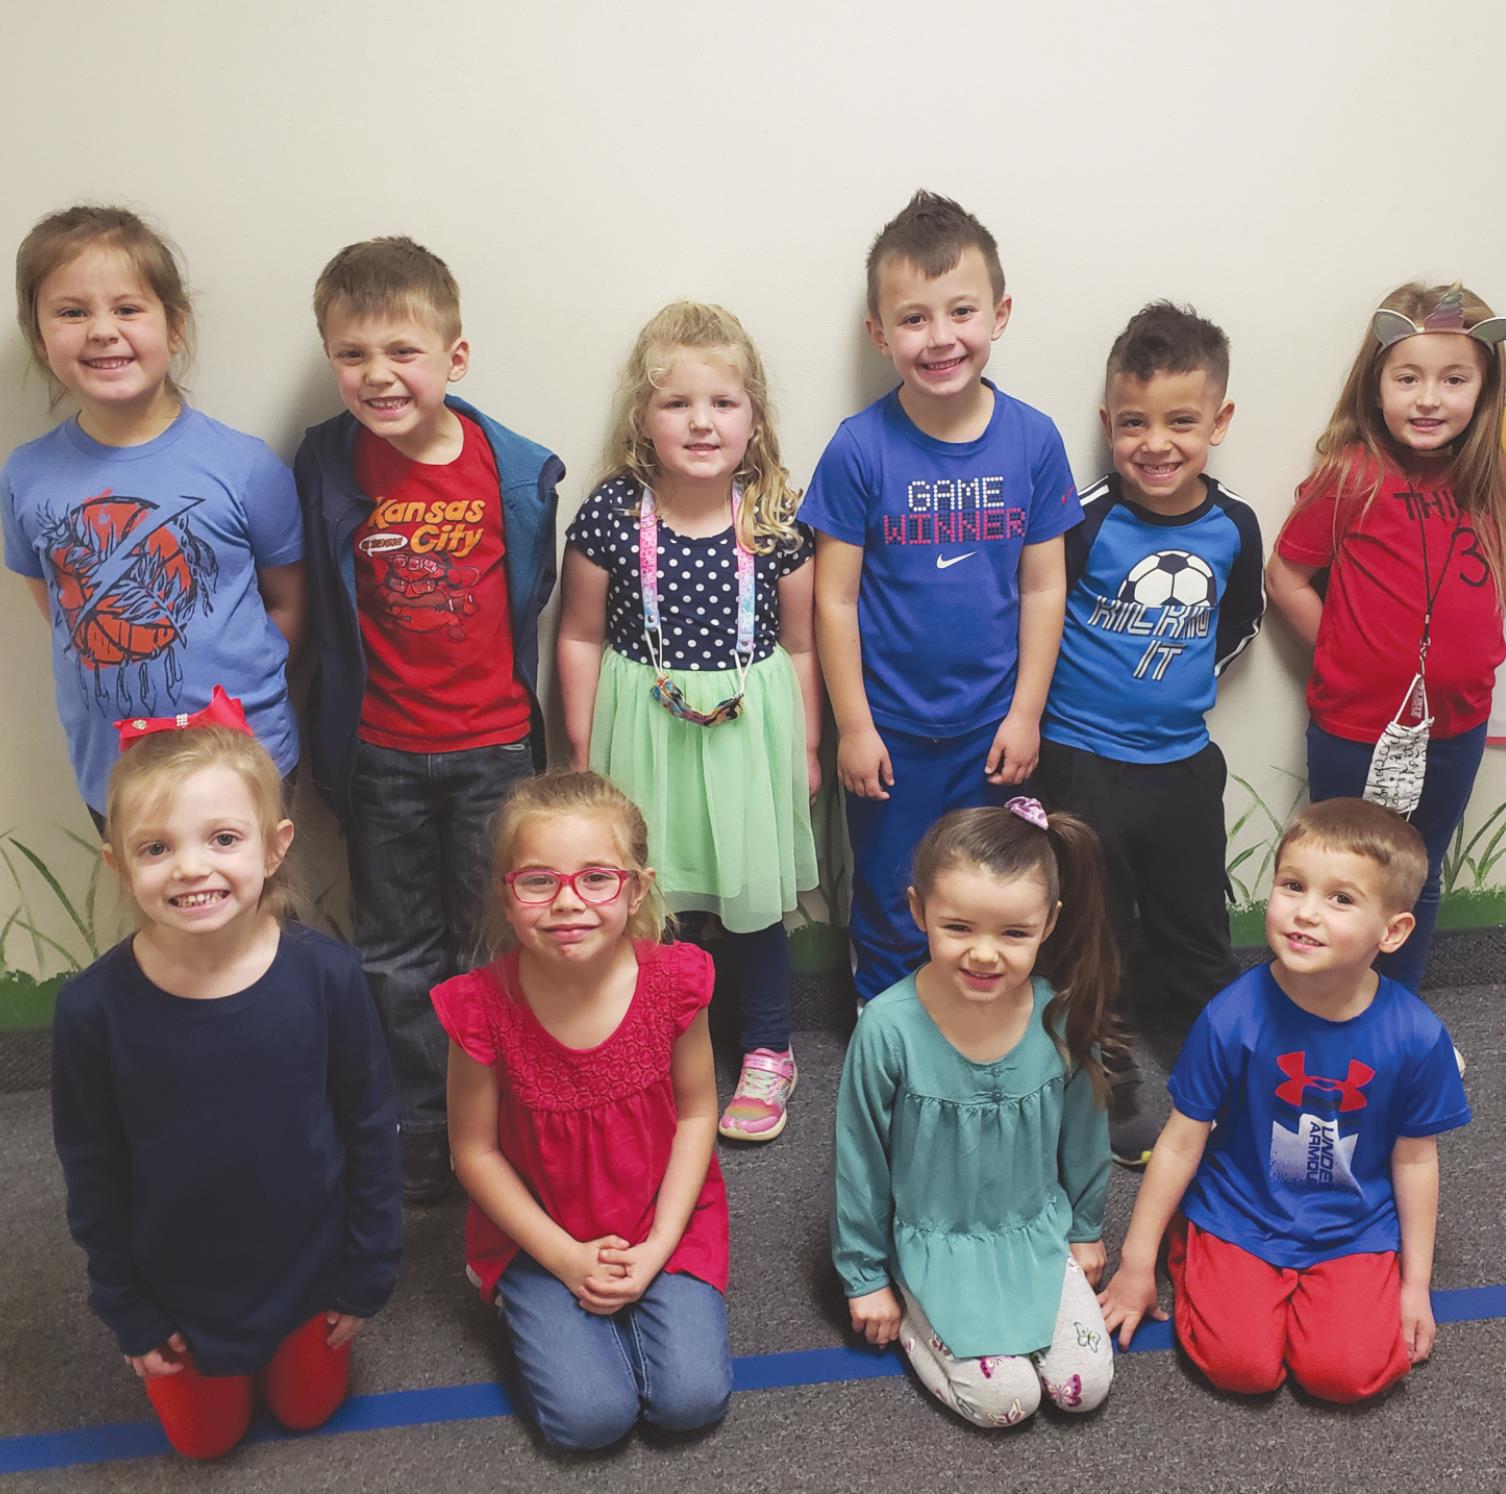 Pictured are members of Kim O’Daniel’s PM Pre-K class who wore red and blue Thursday. Back row, from left, is Kaelor Jordon, Teague Merritt, Finley Matthew, Leon Isufi, Jaxstin Pena and Sutton Lucus. Front row is Ava White, Blake Lyon, Oaklee Hunsicker and Carson Hunt. Leanna Cook/WDN